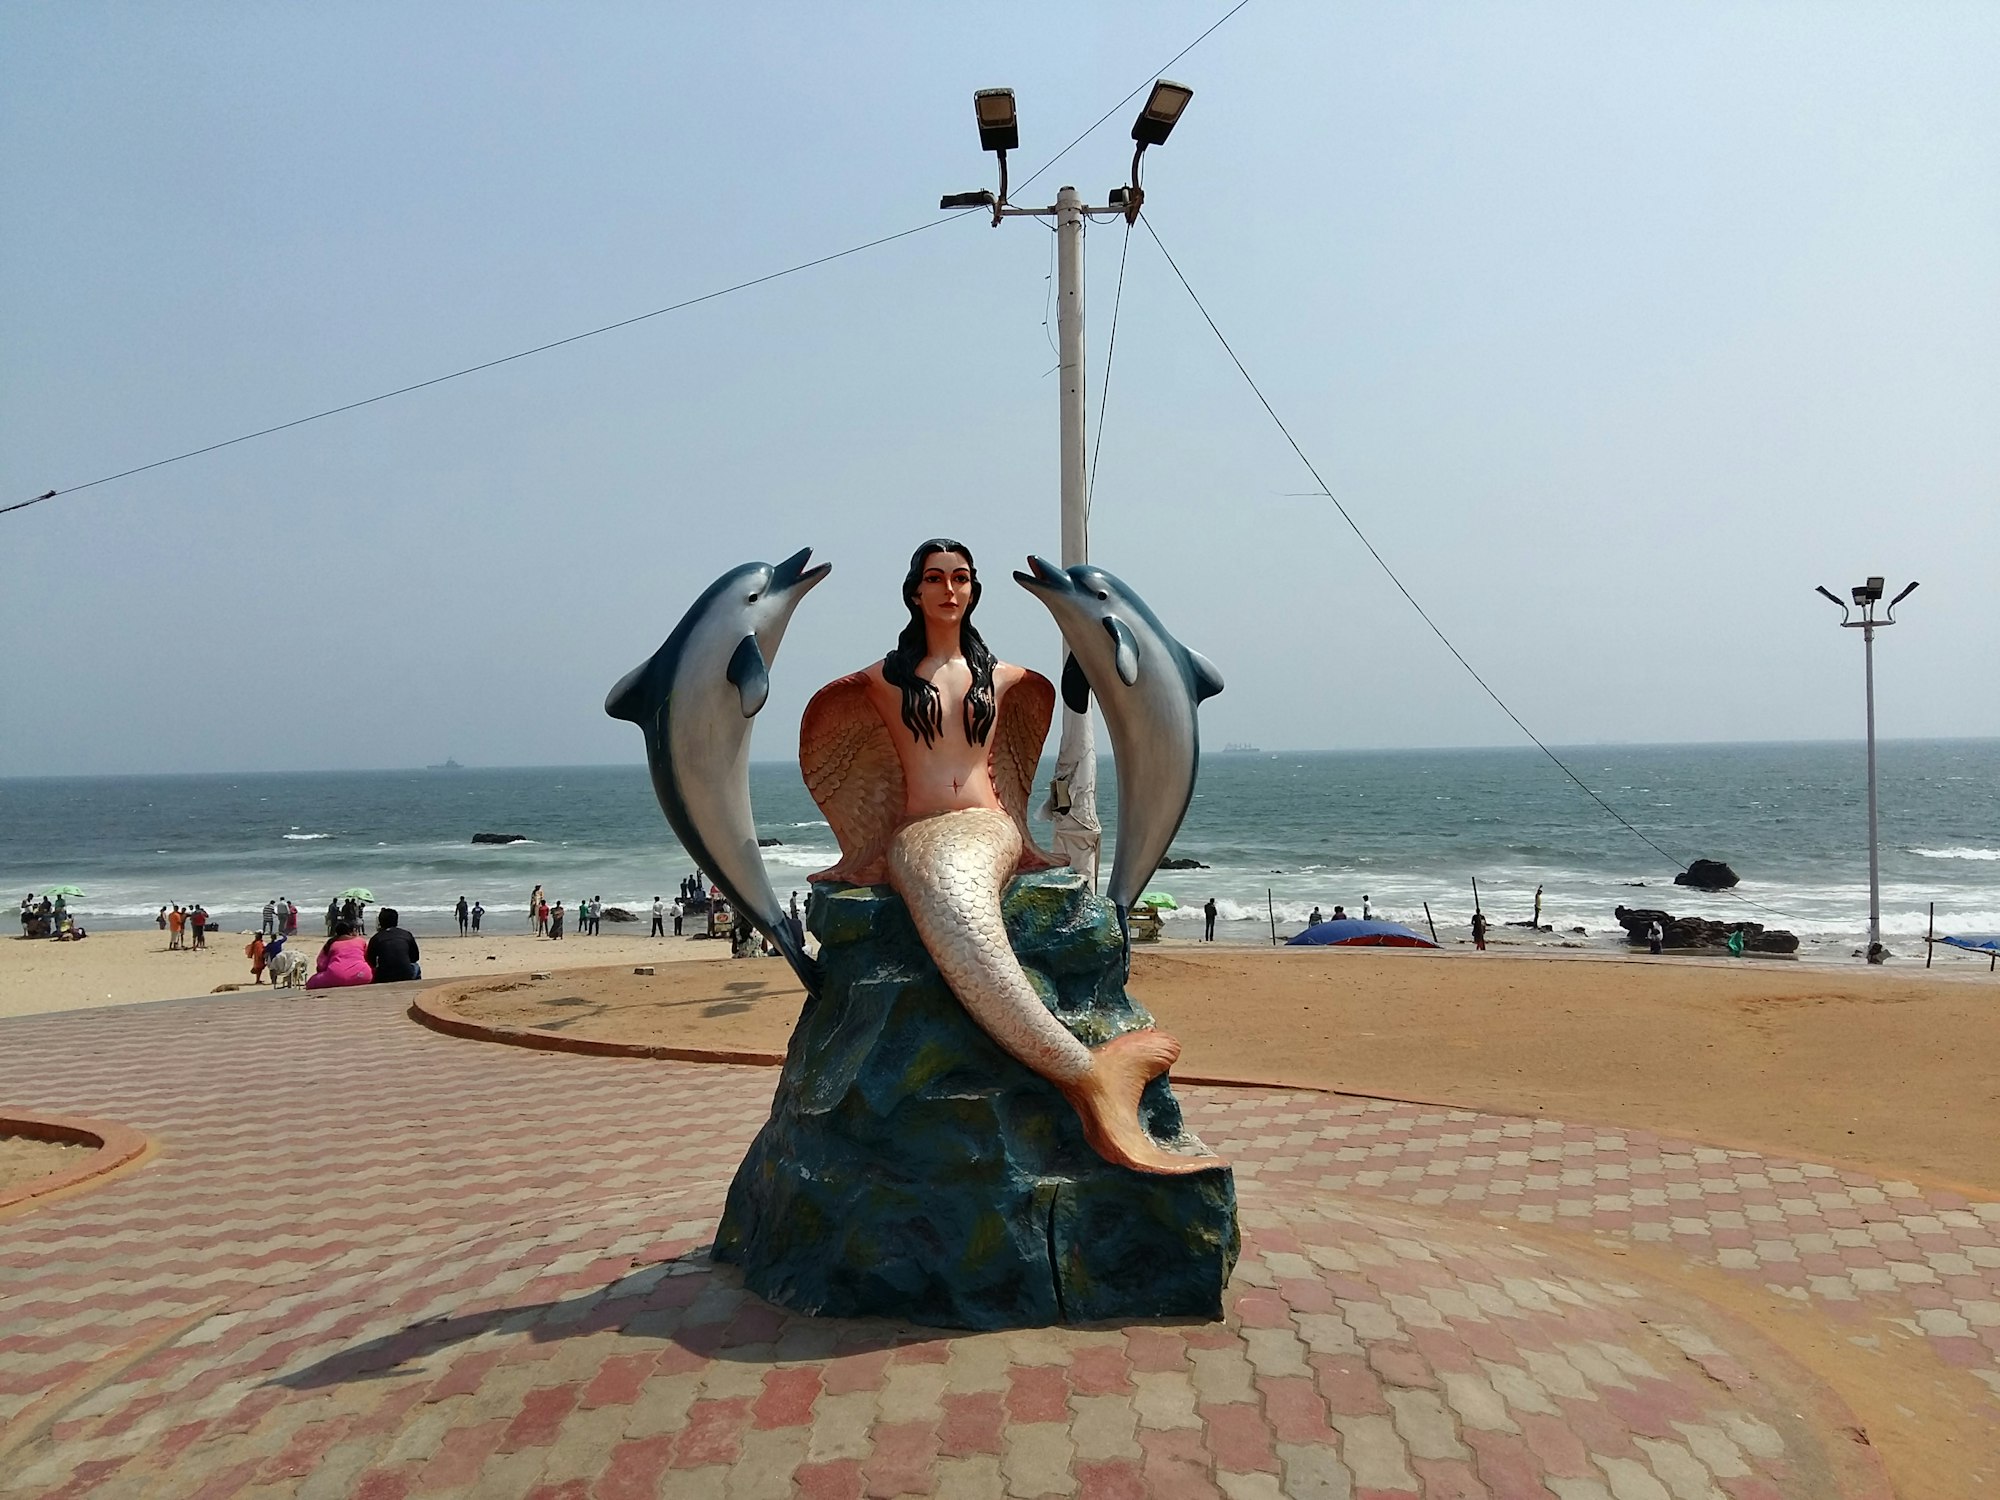 Mermaid with Dolphins Sculpture
RK Beach, also known as Ramakrishna Beach is an integral part of the city and a favorite among Vizagites and Tourists alike. The view of the sunrise from this beach is truly mesmerizing and one can find a number of people enjoying, some relaxed moments in this beautiful beach enjoying the perfect view. This 3 km stretch, kissed by the sea & ships on one side and flanked by multi-colored apartments on the other makes for a truly rewarding drive. The entire stretch is dotted with beach food snacks.